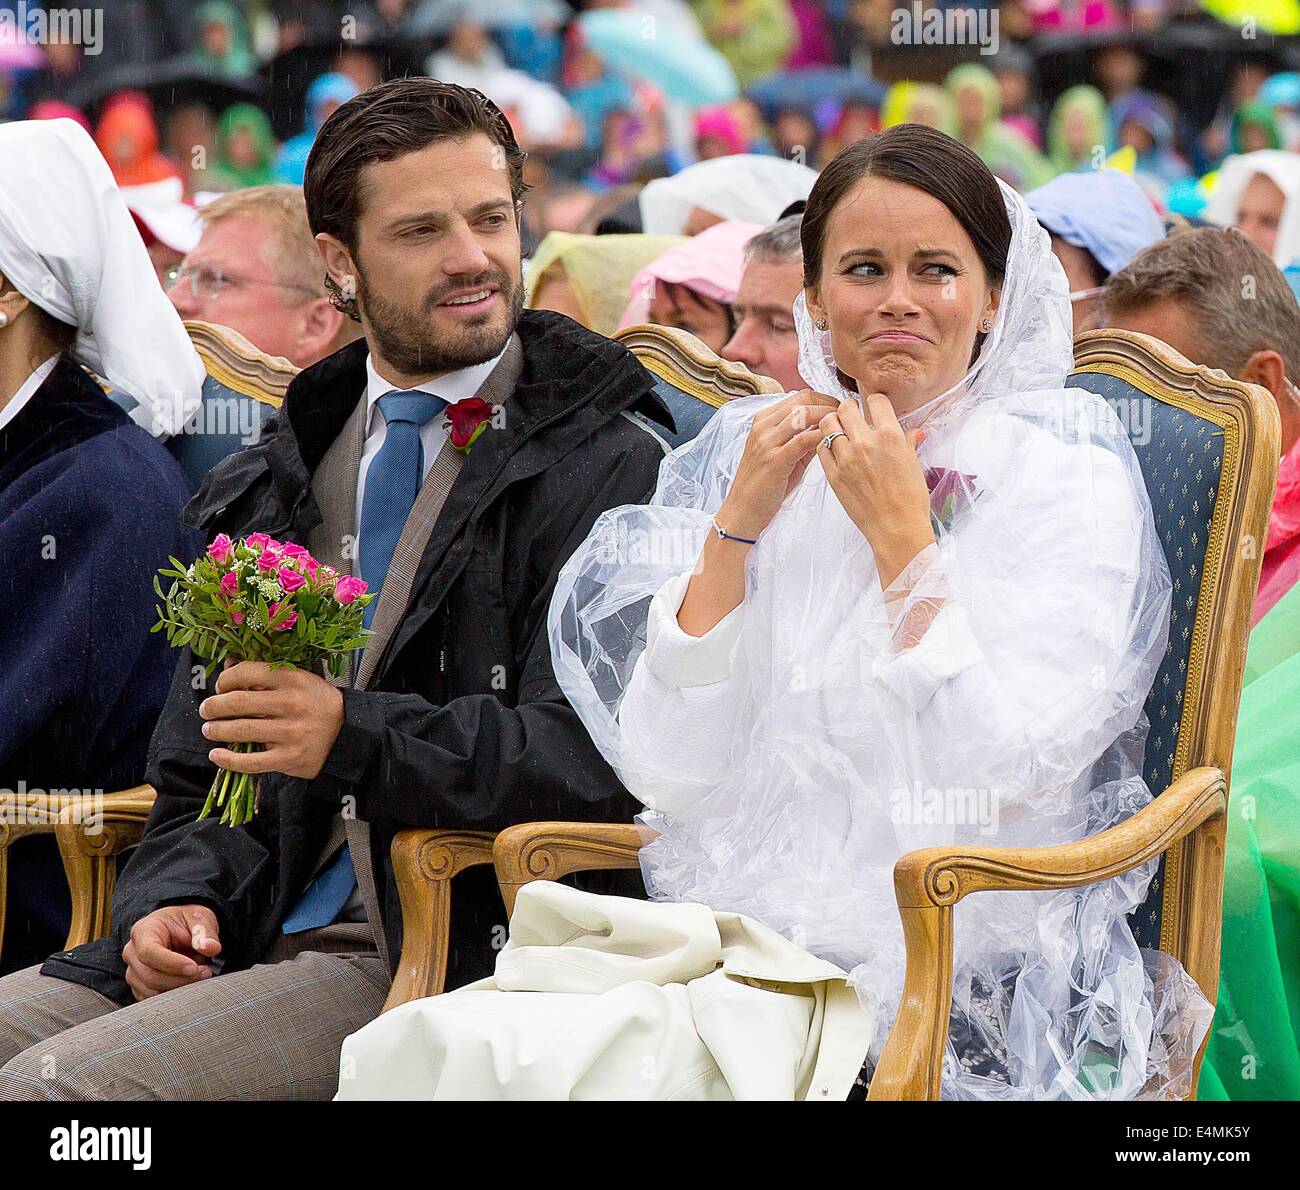 Borgholm, 14-07-2014 Prince Carl Philip of Sweden and fiancee Miss Sofia Hellqvist Celebration of the 37th Birthday of Crown Princess Victoria of Sweden at the stadion of Borgholm RPE/Albert Nieboer// /dpa -NO WIRE SERVICE- /dpa -NO WIRE SERVICE- Stock Photo